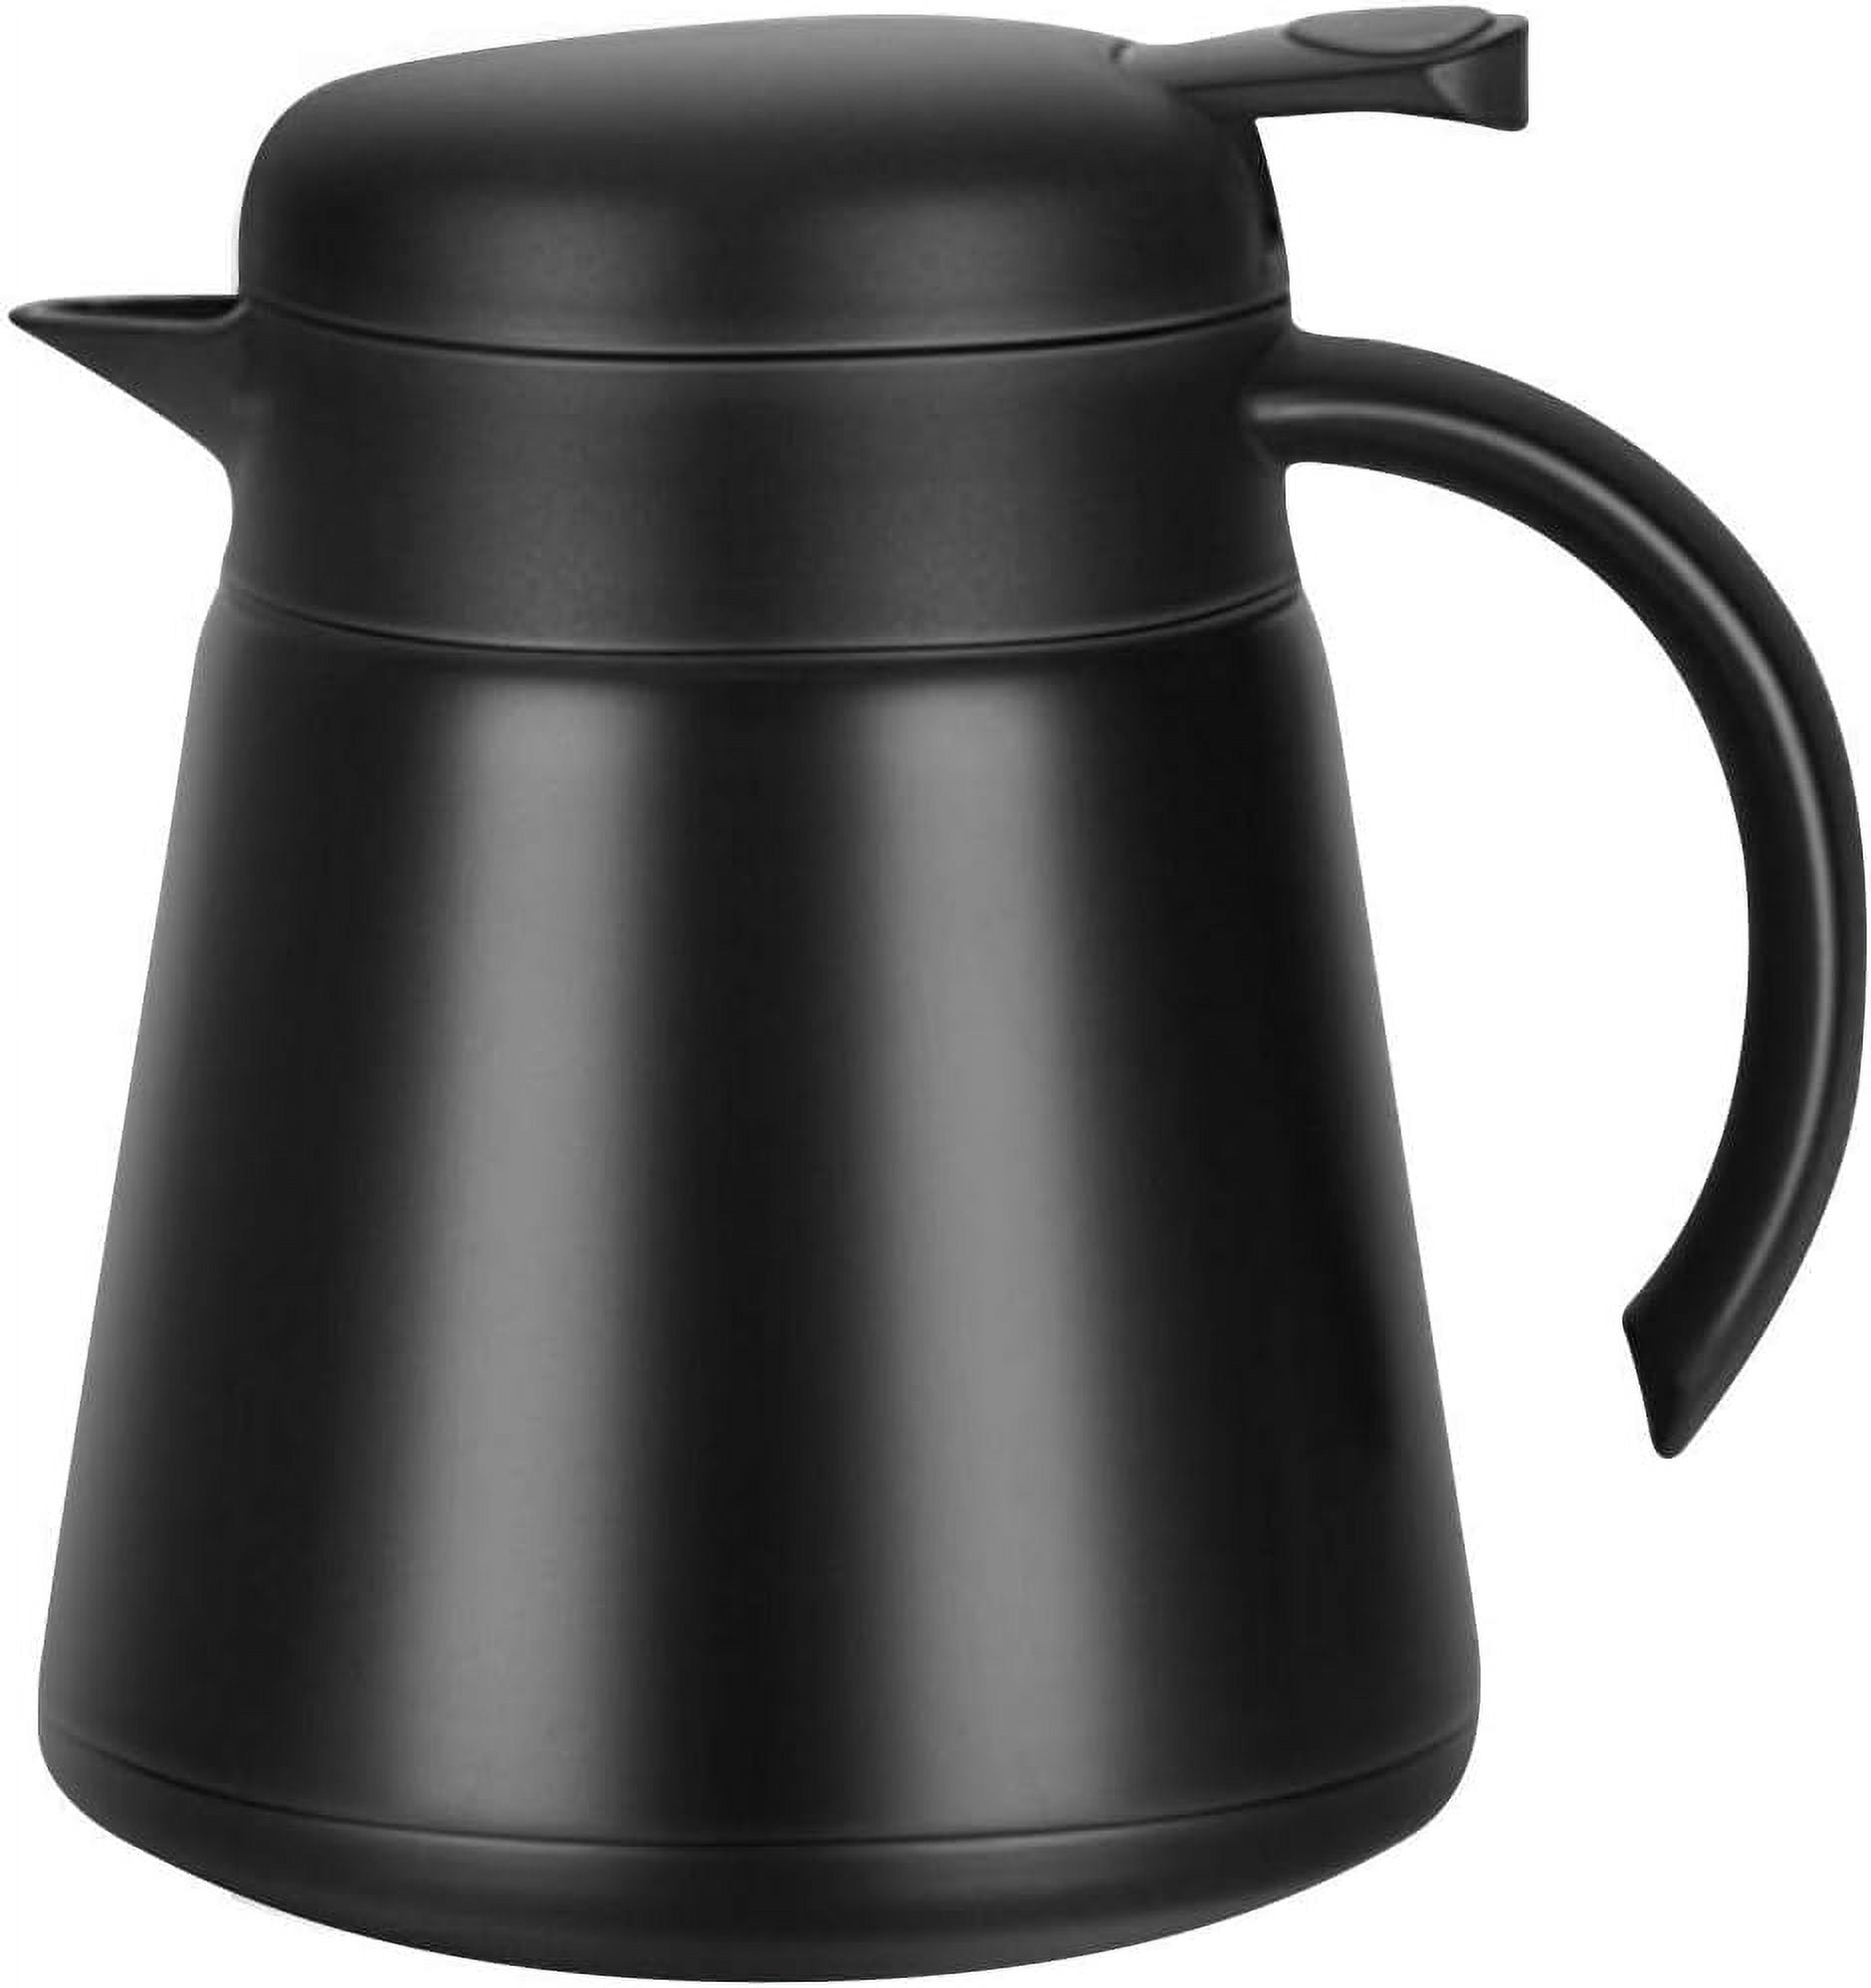 Cudinham Thermal Coffee Carafe for Keeping Hot,34oz Large Capacity Thermos for Hot Drinks,24 Hours Heat Retention,Double Wall V